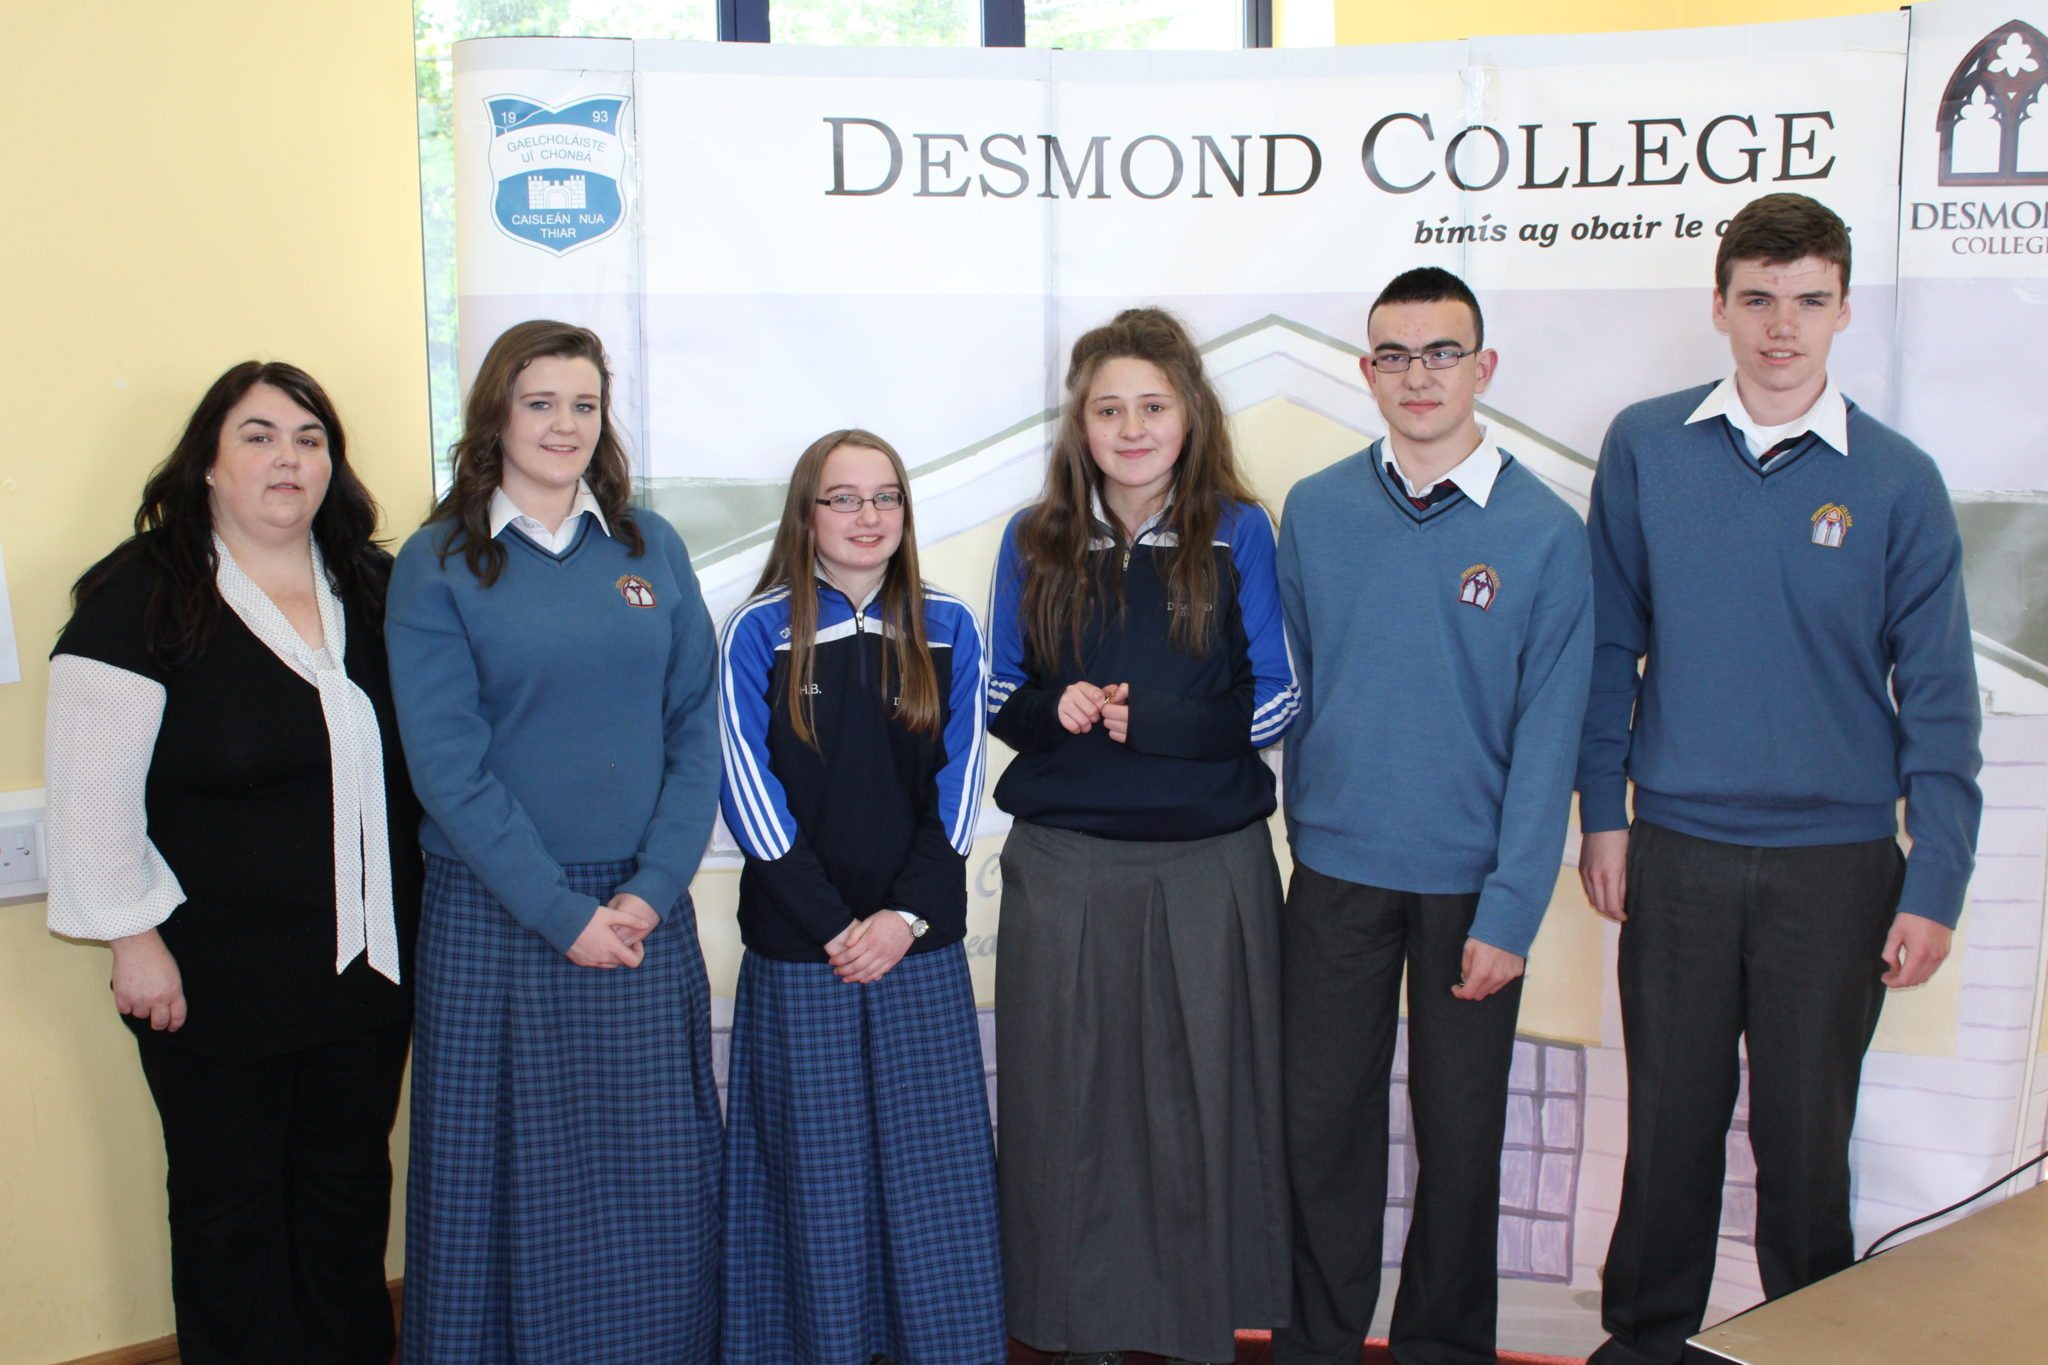 Third Year Attendance Awards: Desmond College: Miss Supple with Niamh O'Connell, Hannah Barrett, Muireann Tobin, Liam Conway and Mark Cahill